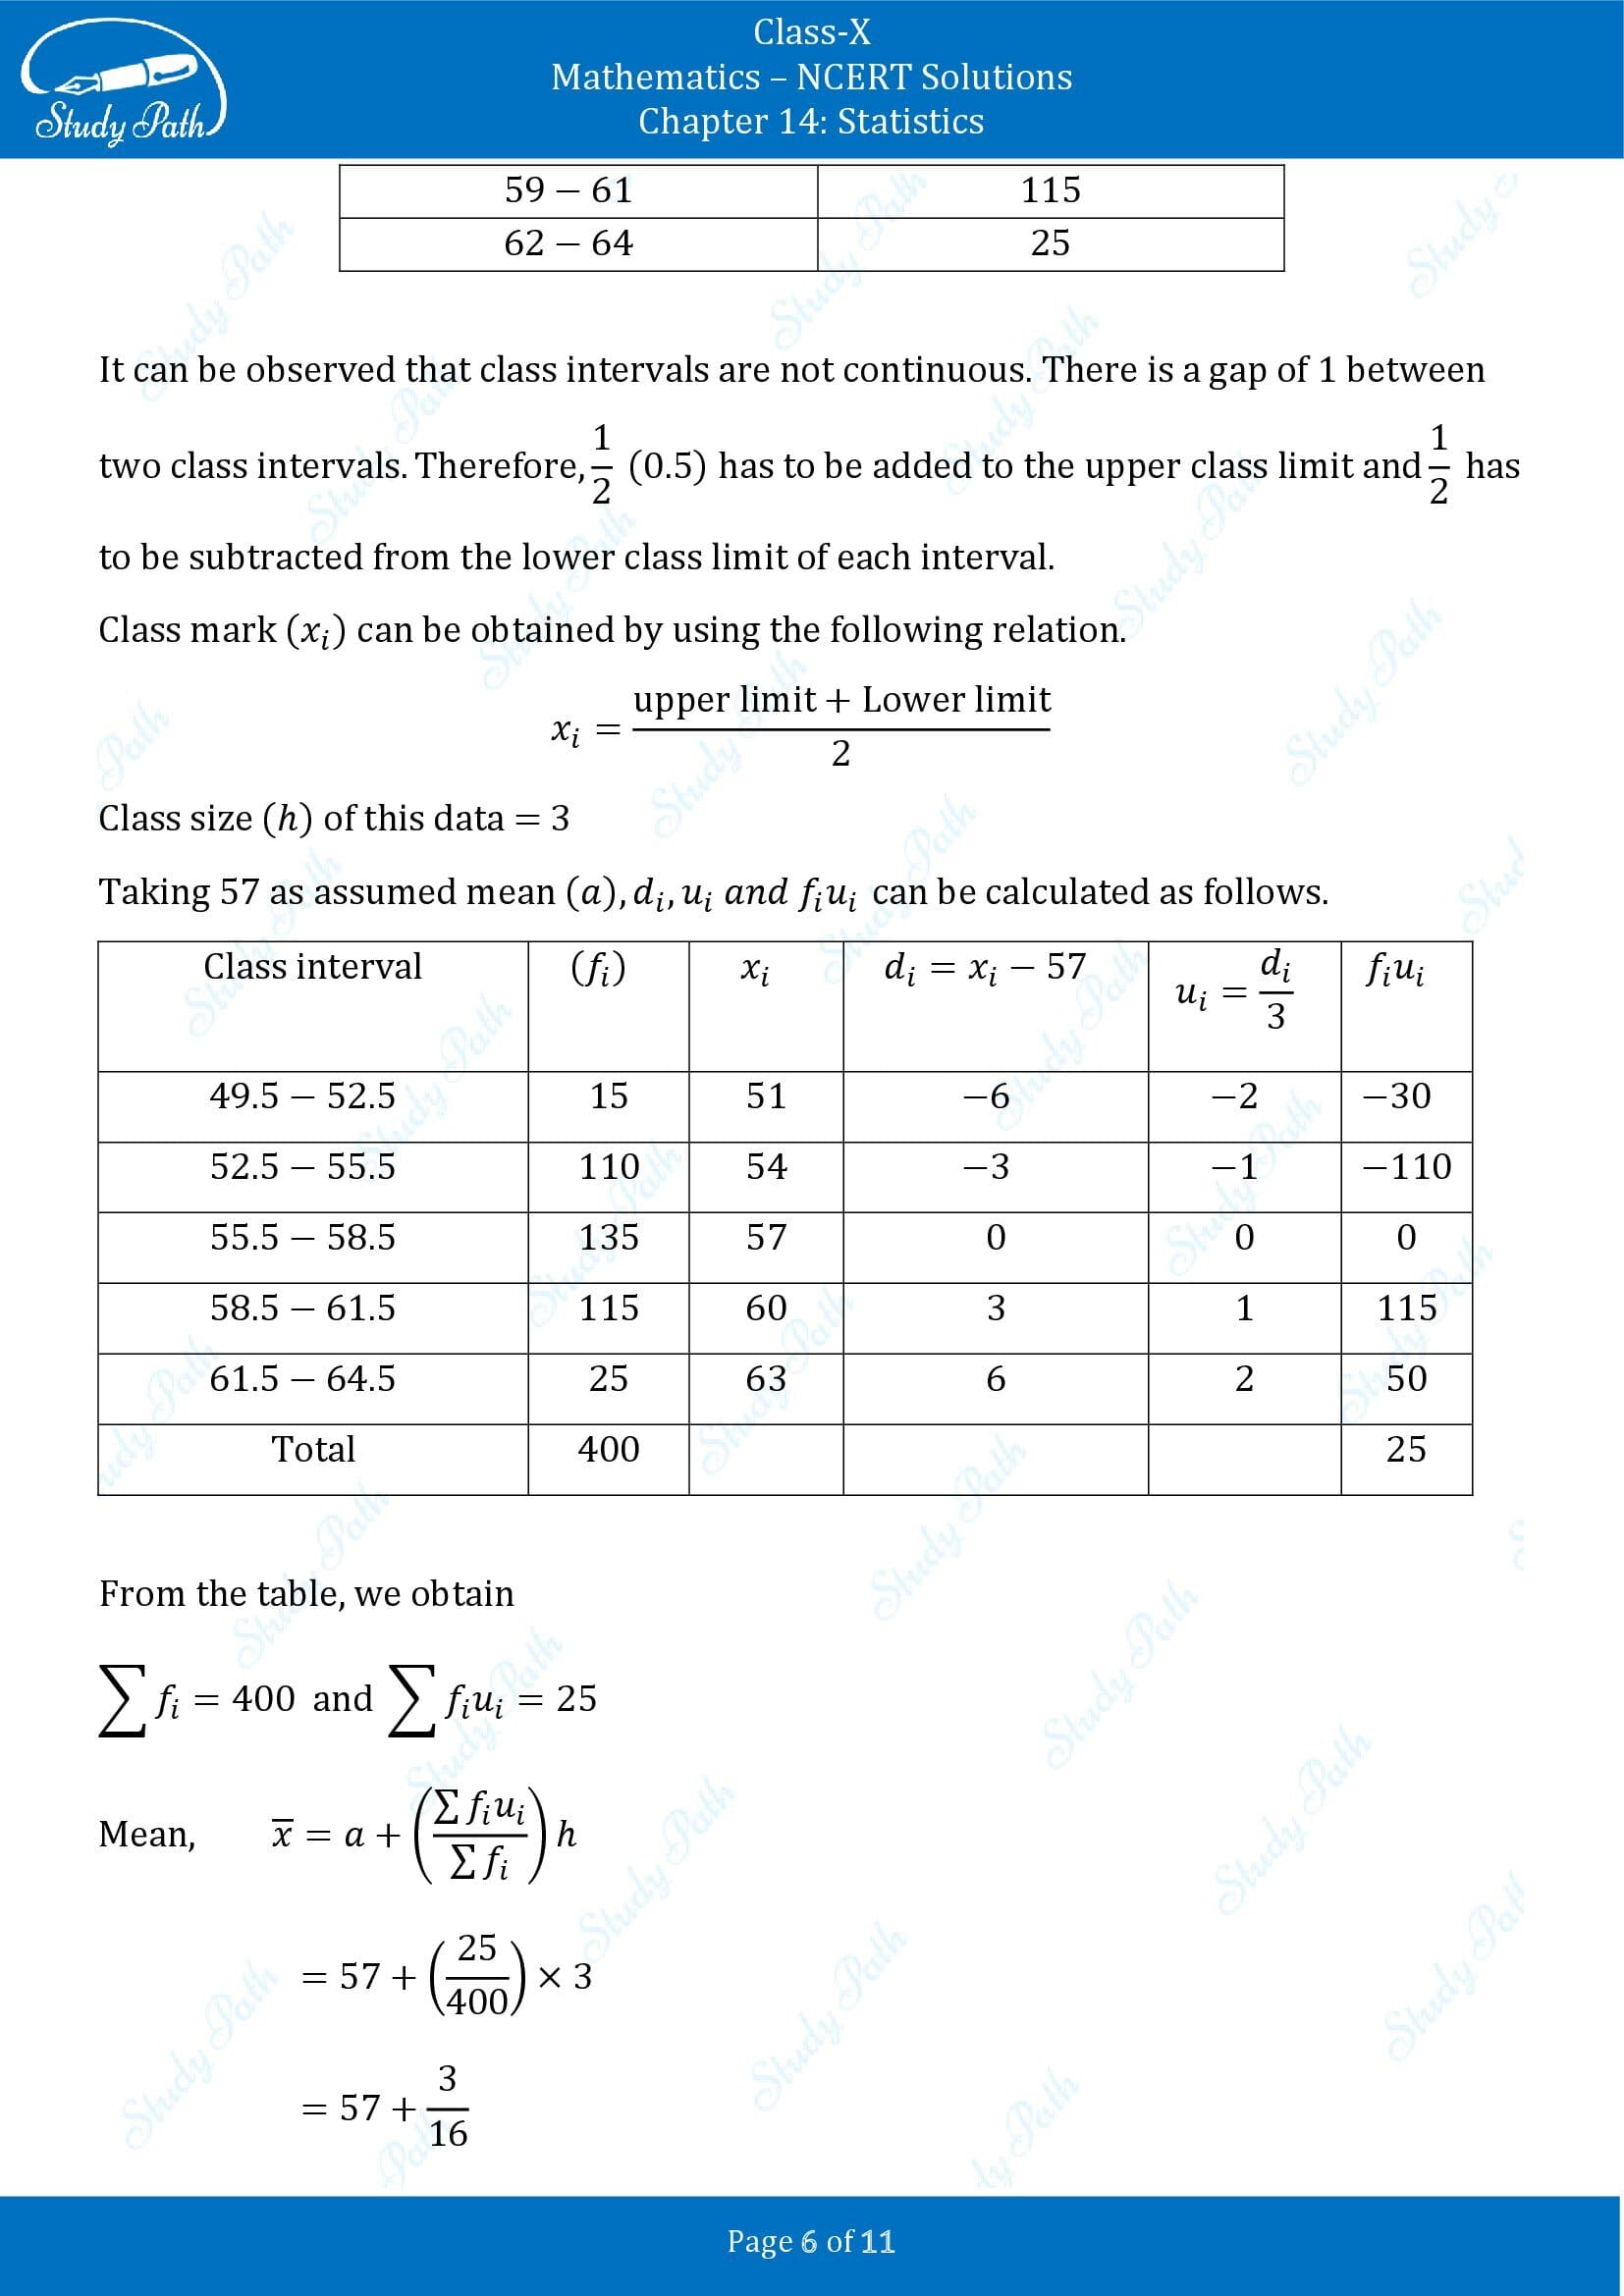 NCERT Solutions for Class 10 Maths Chapter 14 Statistics Exercise 14.1 00006